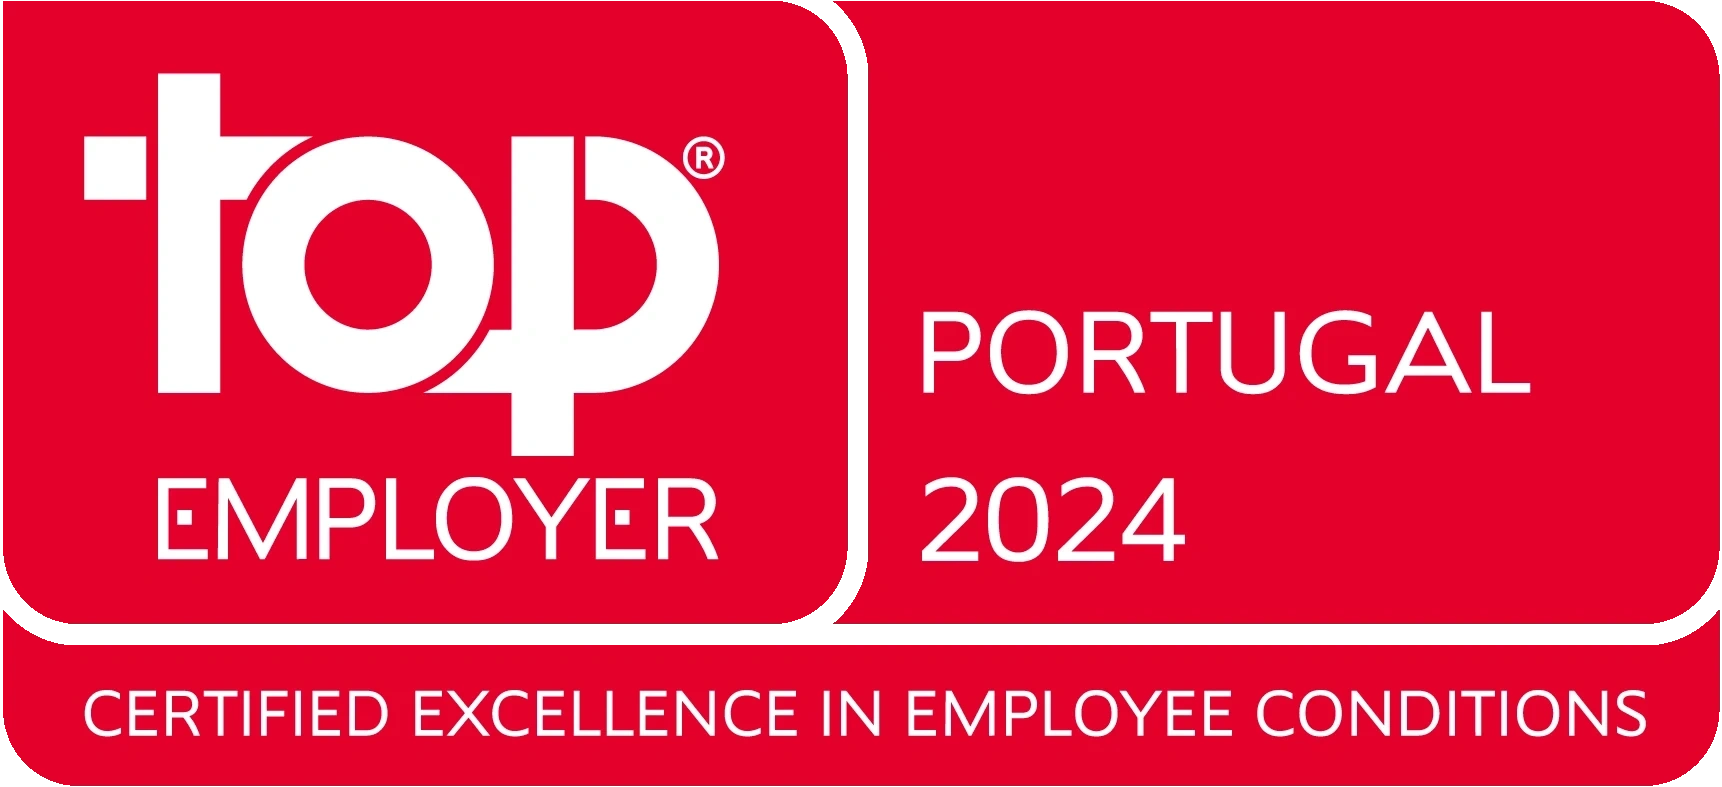 Global Top Employer #1 in Portugal